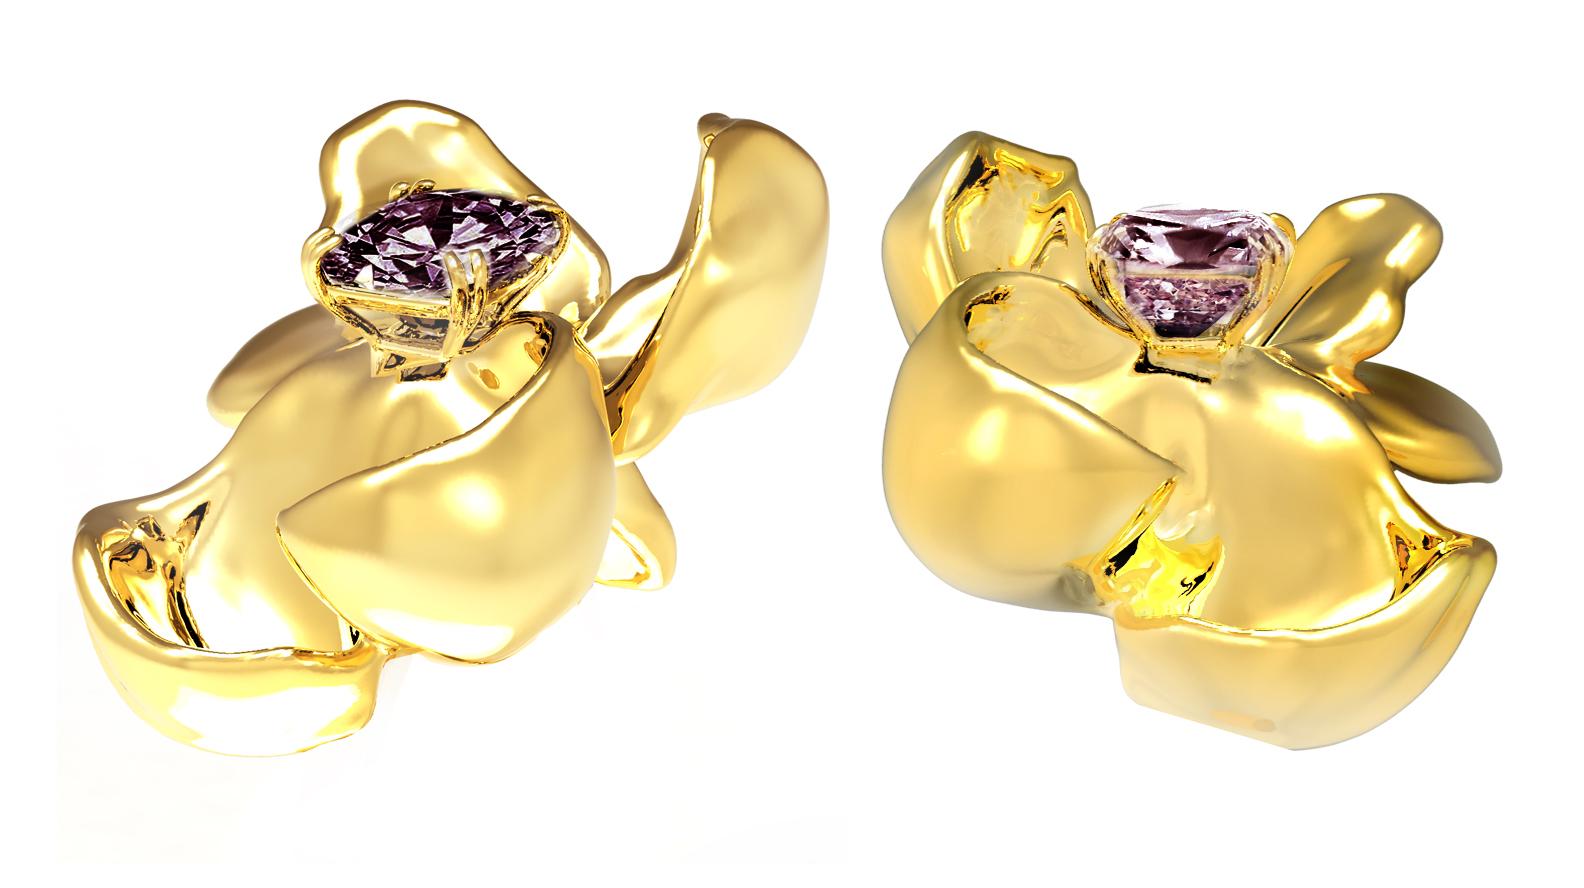 These contemporary Magnolia Flower stud earrings are crafted in 18 karat yellow gold with storm purple cushion spinels totaling approximately 3 carats. The tender water-like surface of the spinel reflects light beautifully, creating a mirrored